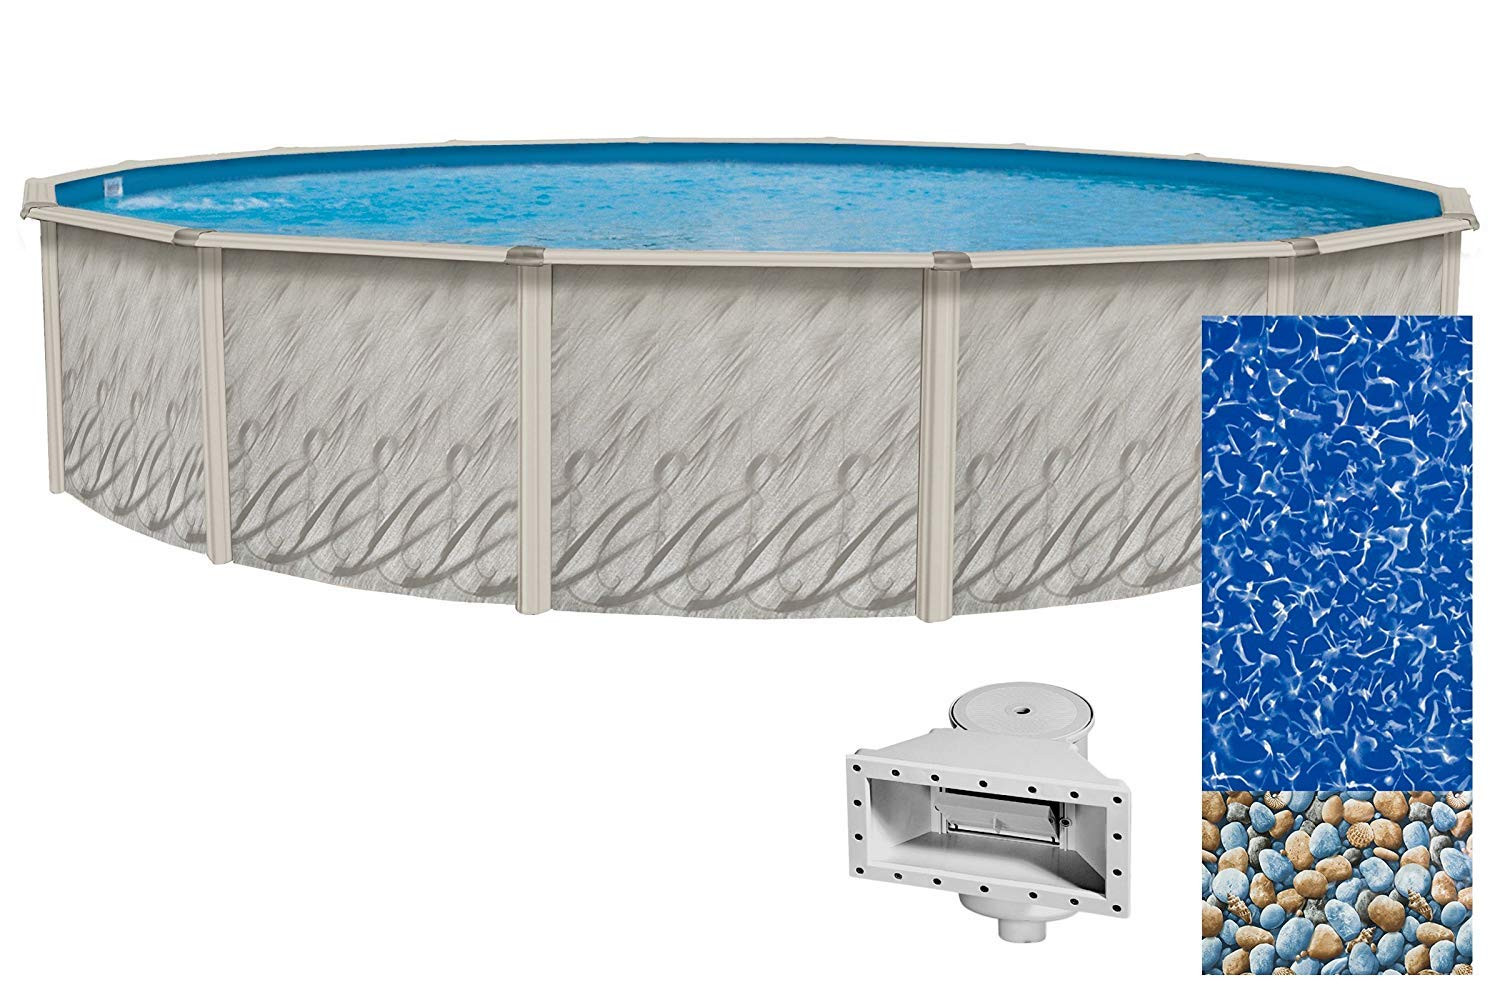 Best Permanent Above Ground Pool
 7 Best Permanent Ground Pool 2019 Reviews & Consumer